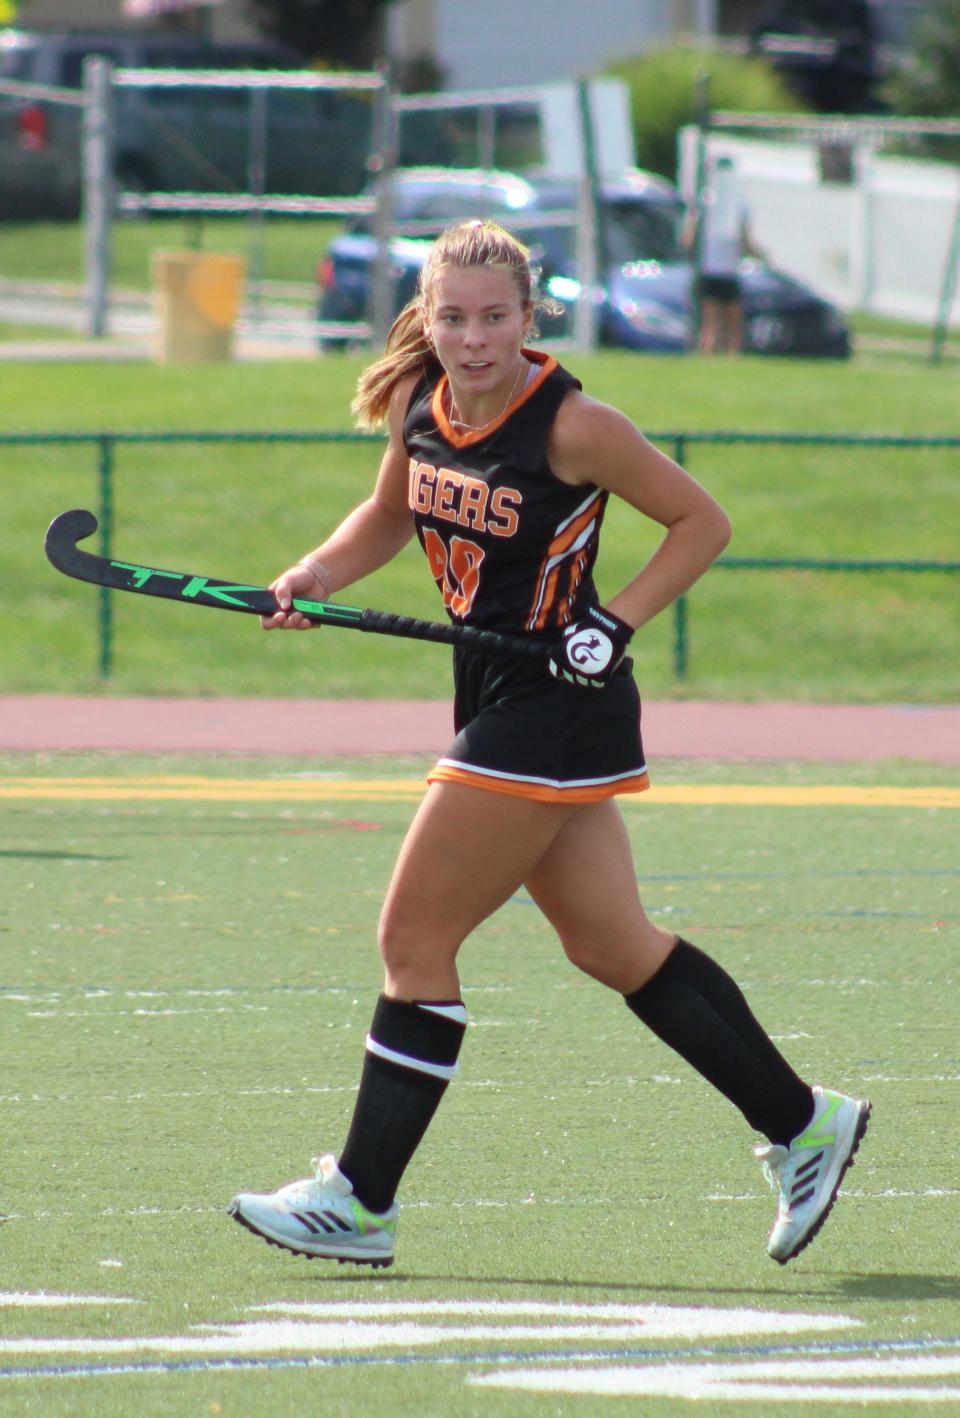 Hackettstown senior Kiara Koeller broke the single-season school record for goals last fall. She has now broken the career goal-scoring record, which was held by her former club coach, Heather Kozimor.